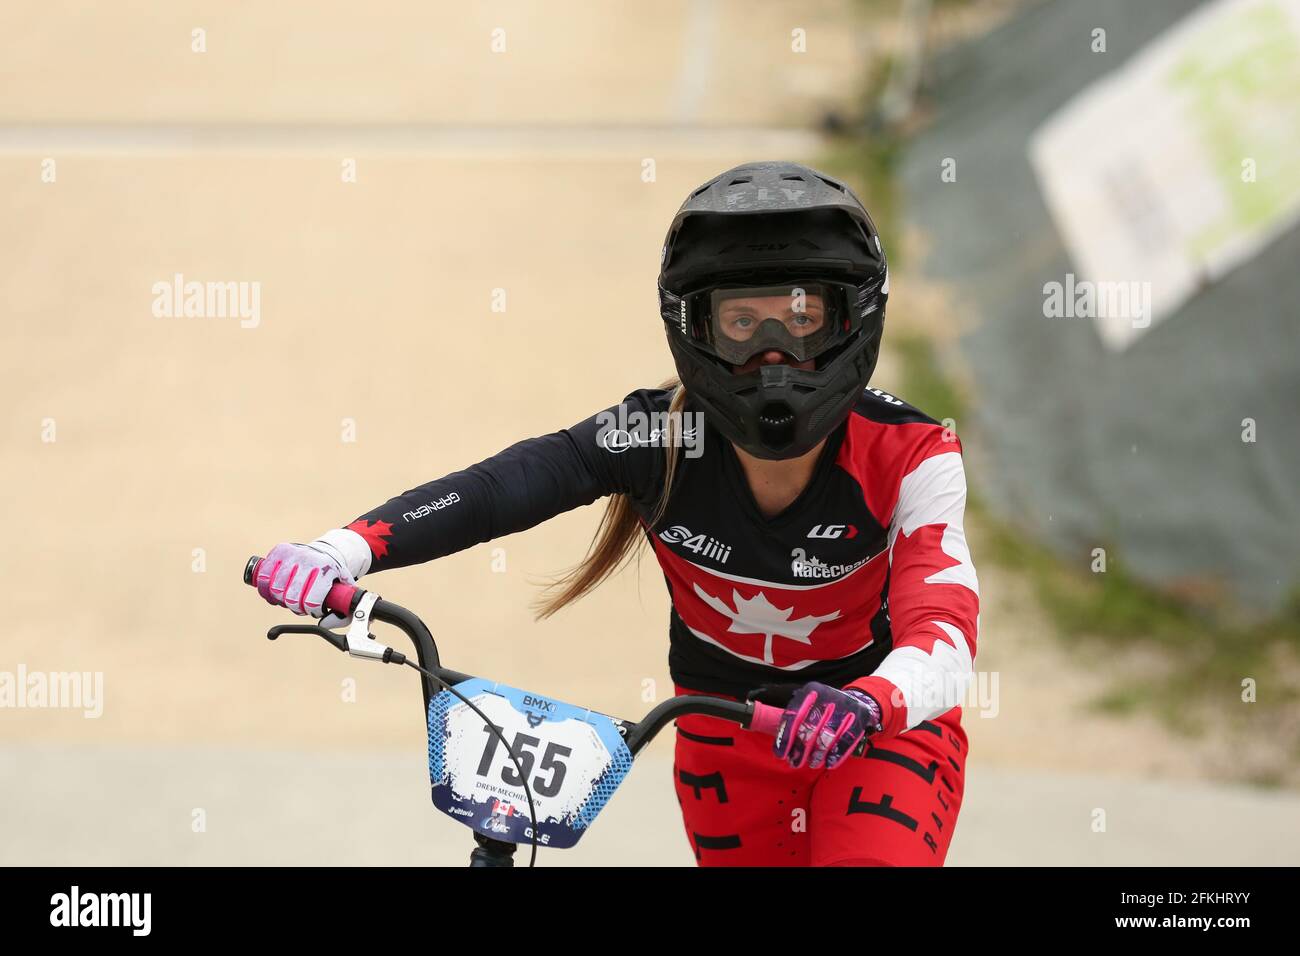 Verona, Italy. 01st May, 2021. Drew MECHIELSEN of Canada competes in the BMX Racing Women Elite Round 1 of the UEC European Cup at the BMX Olympic Arena on May 1st 2021 in Verona, Italy Credit: Mickael Chavet/Alamy Live News Stock Photo